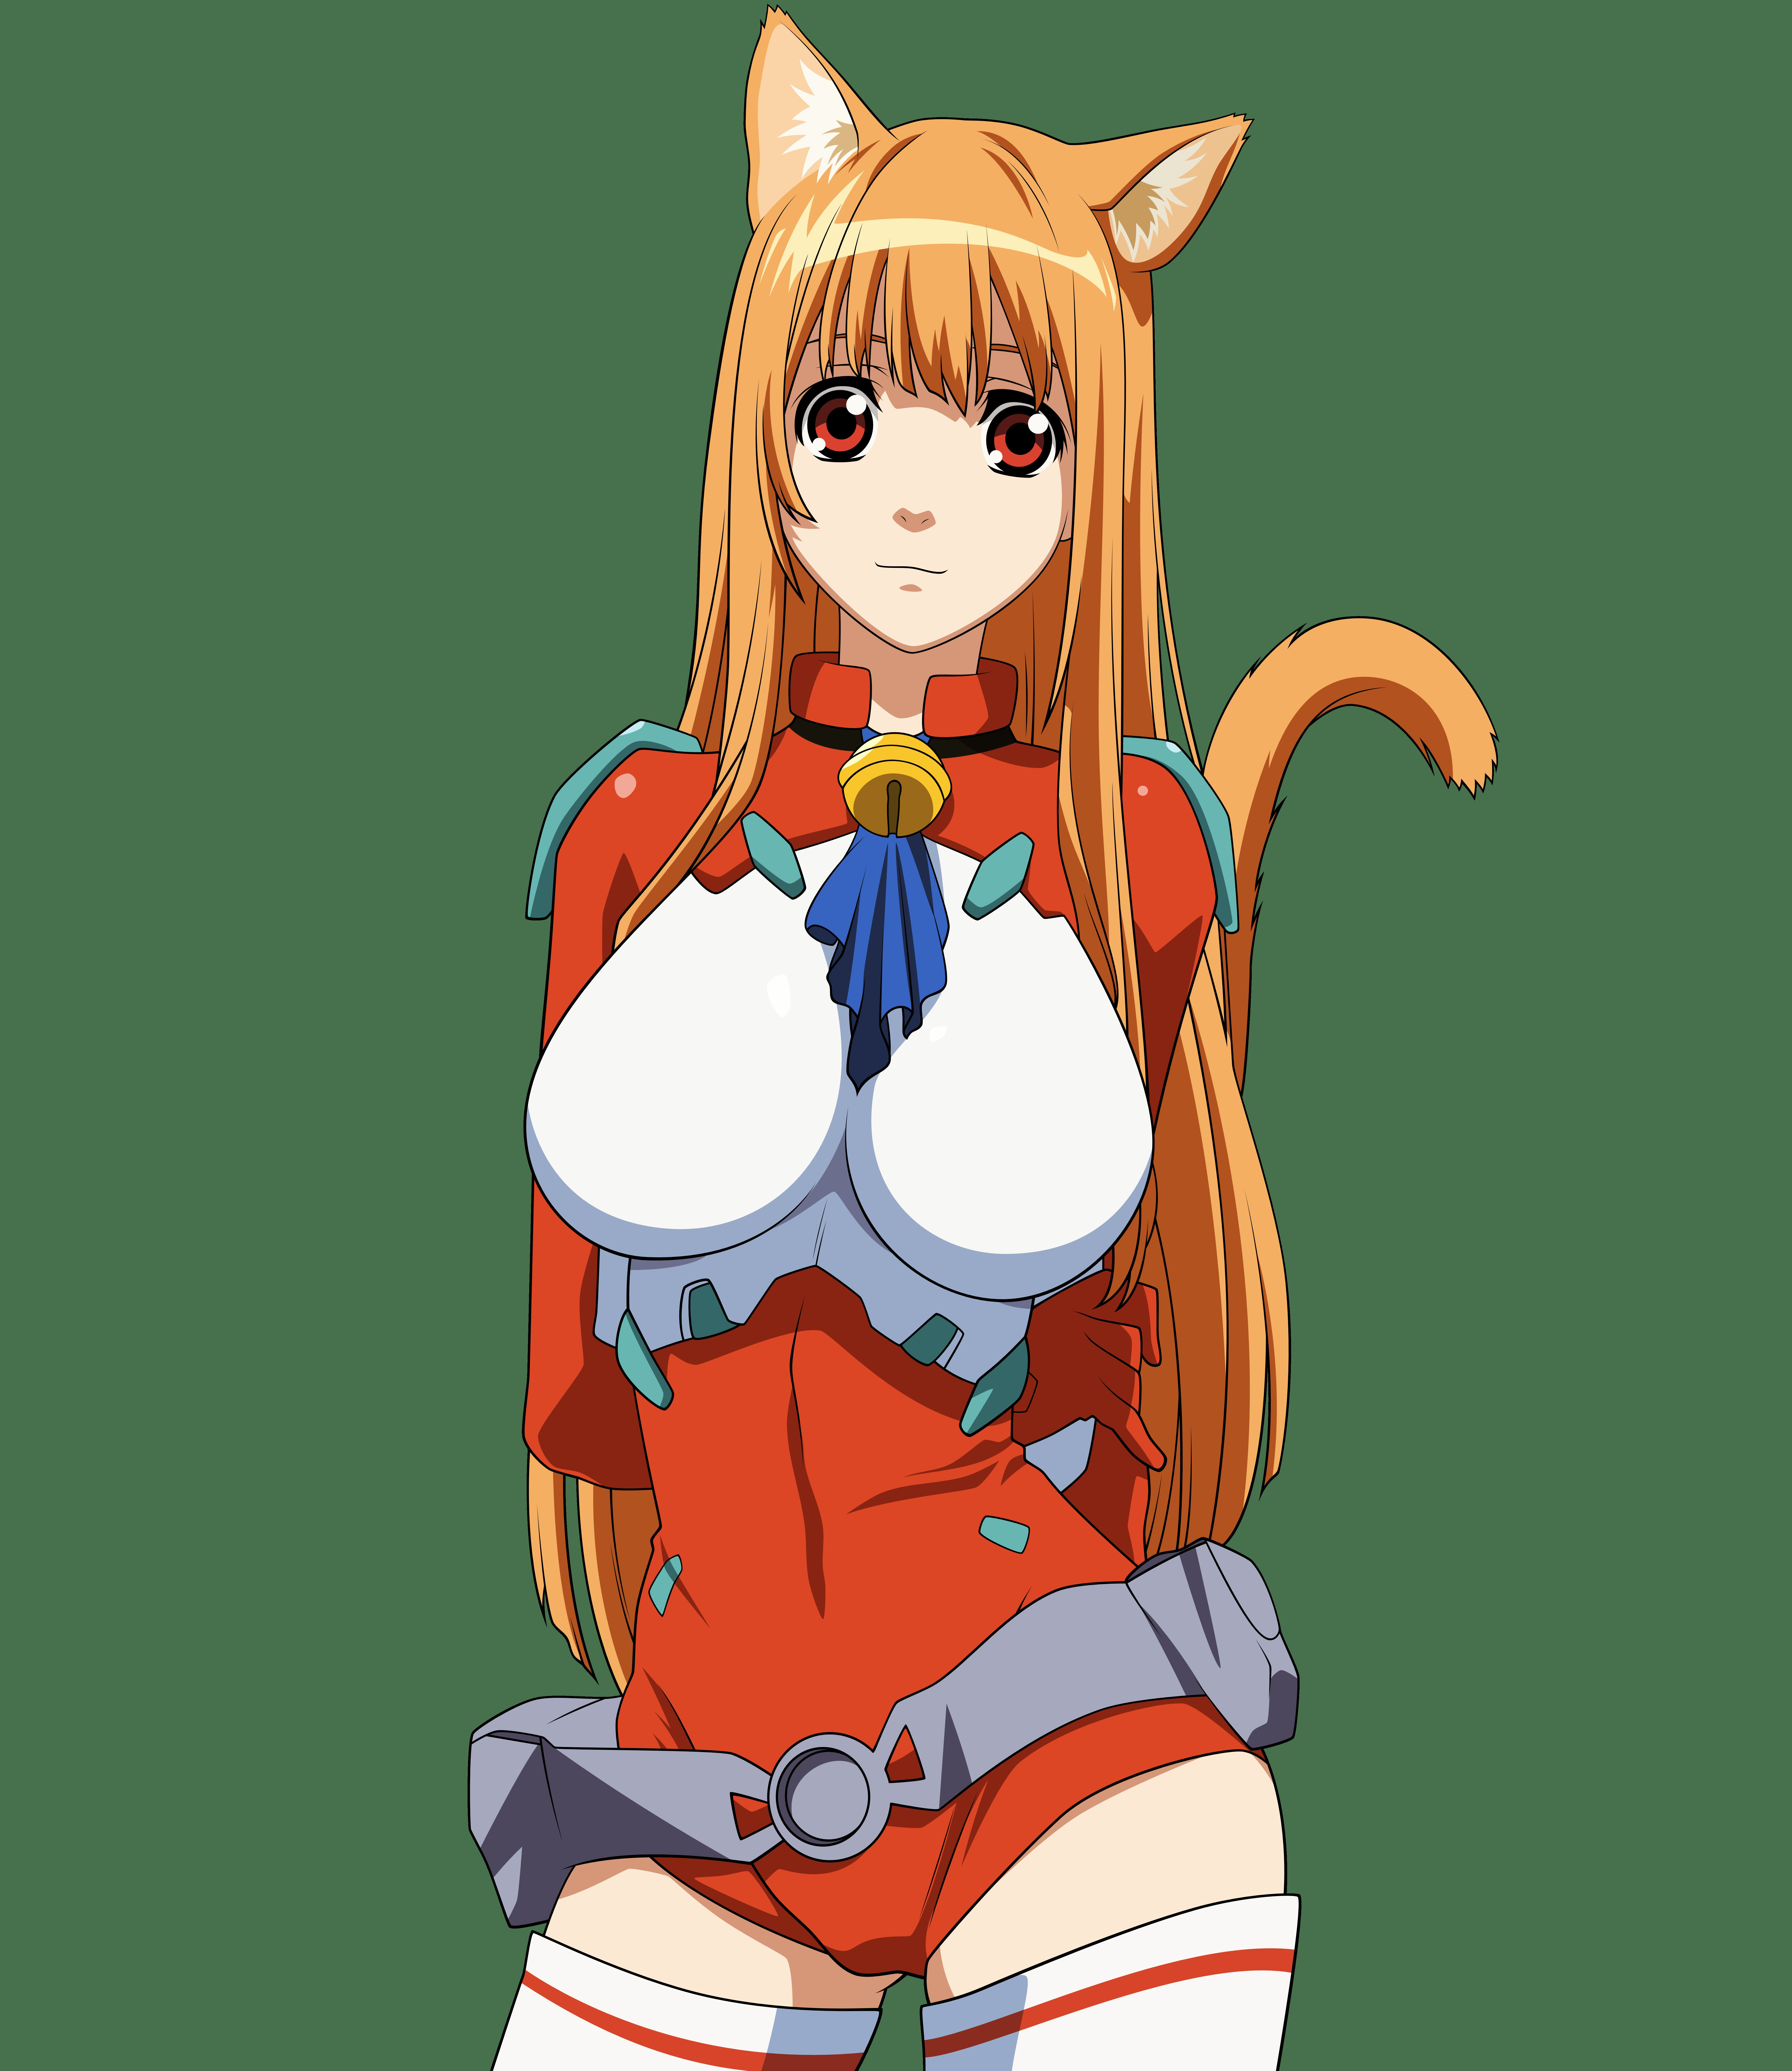 [Anime character material] png erotic images of animated characters part 44 20